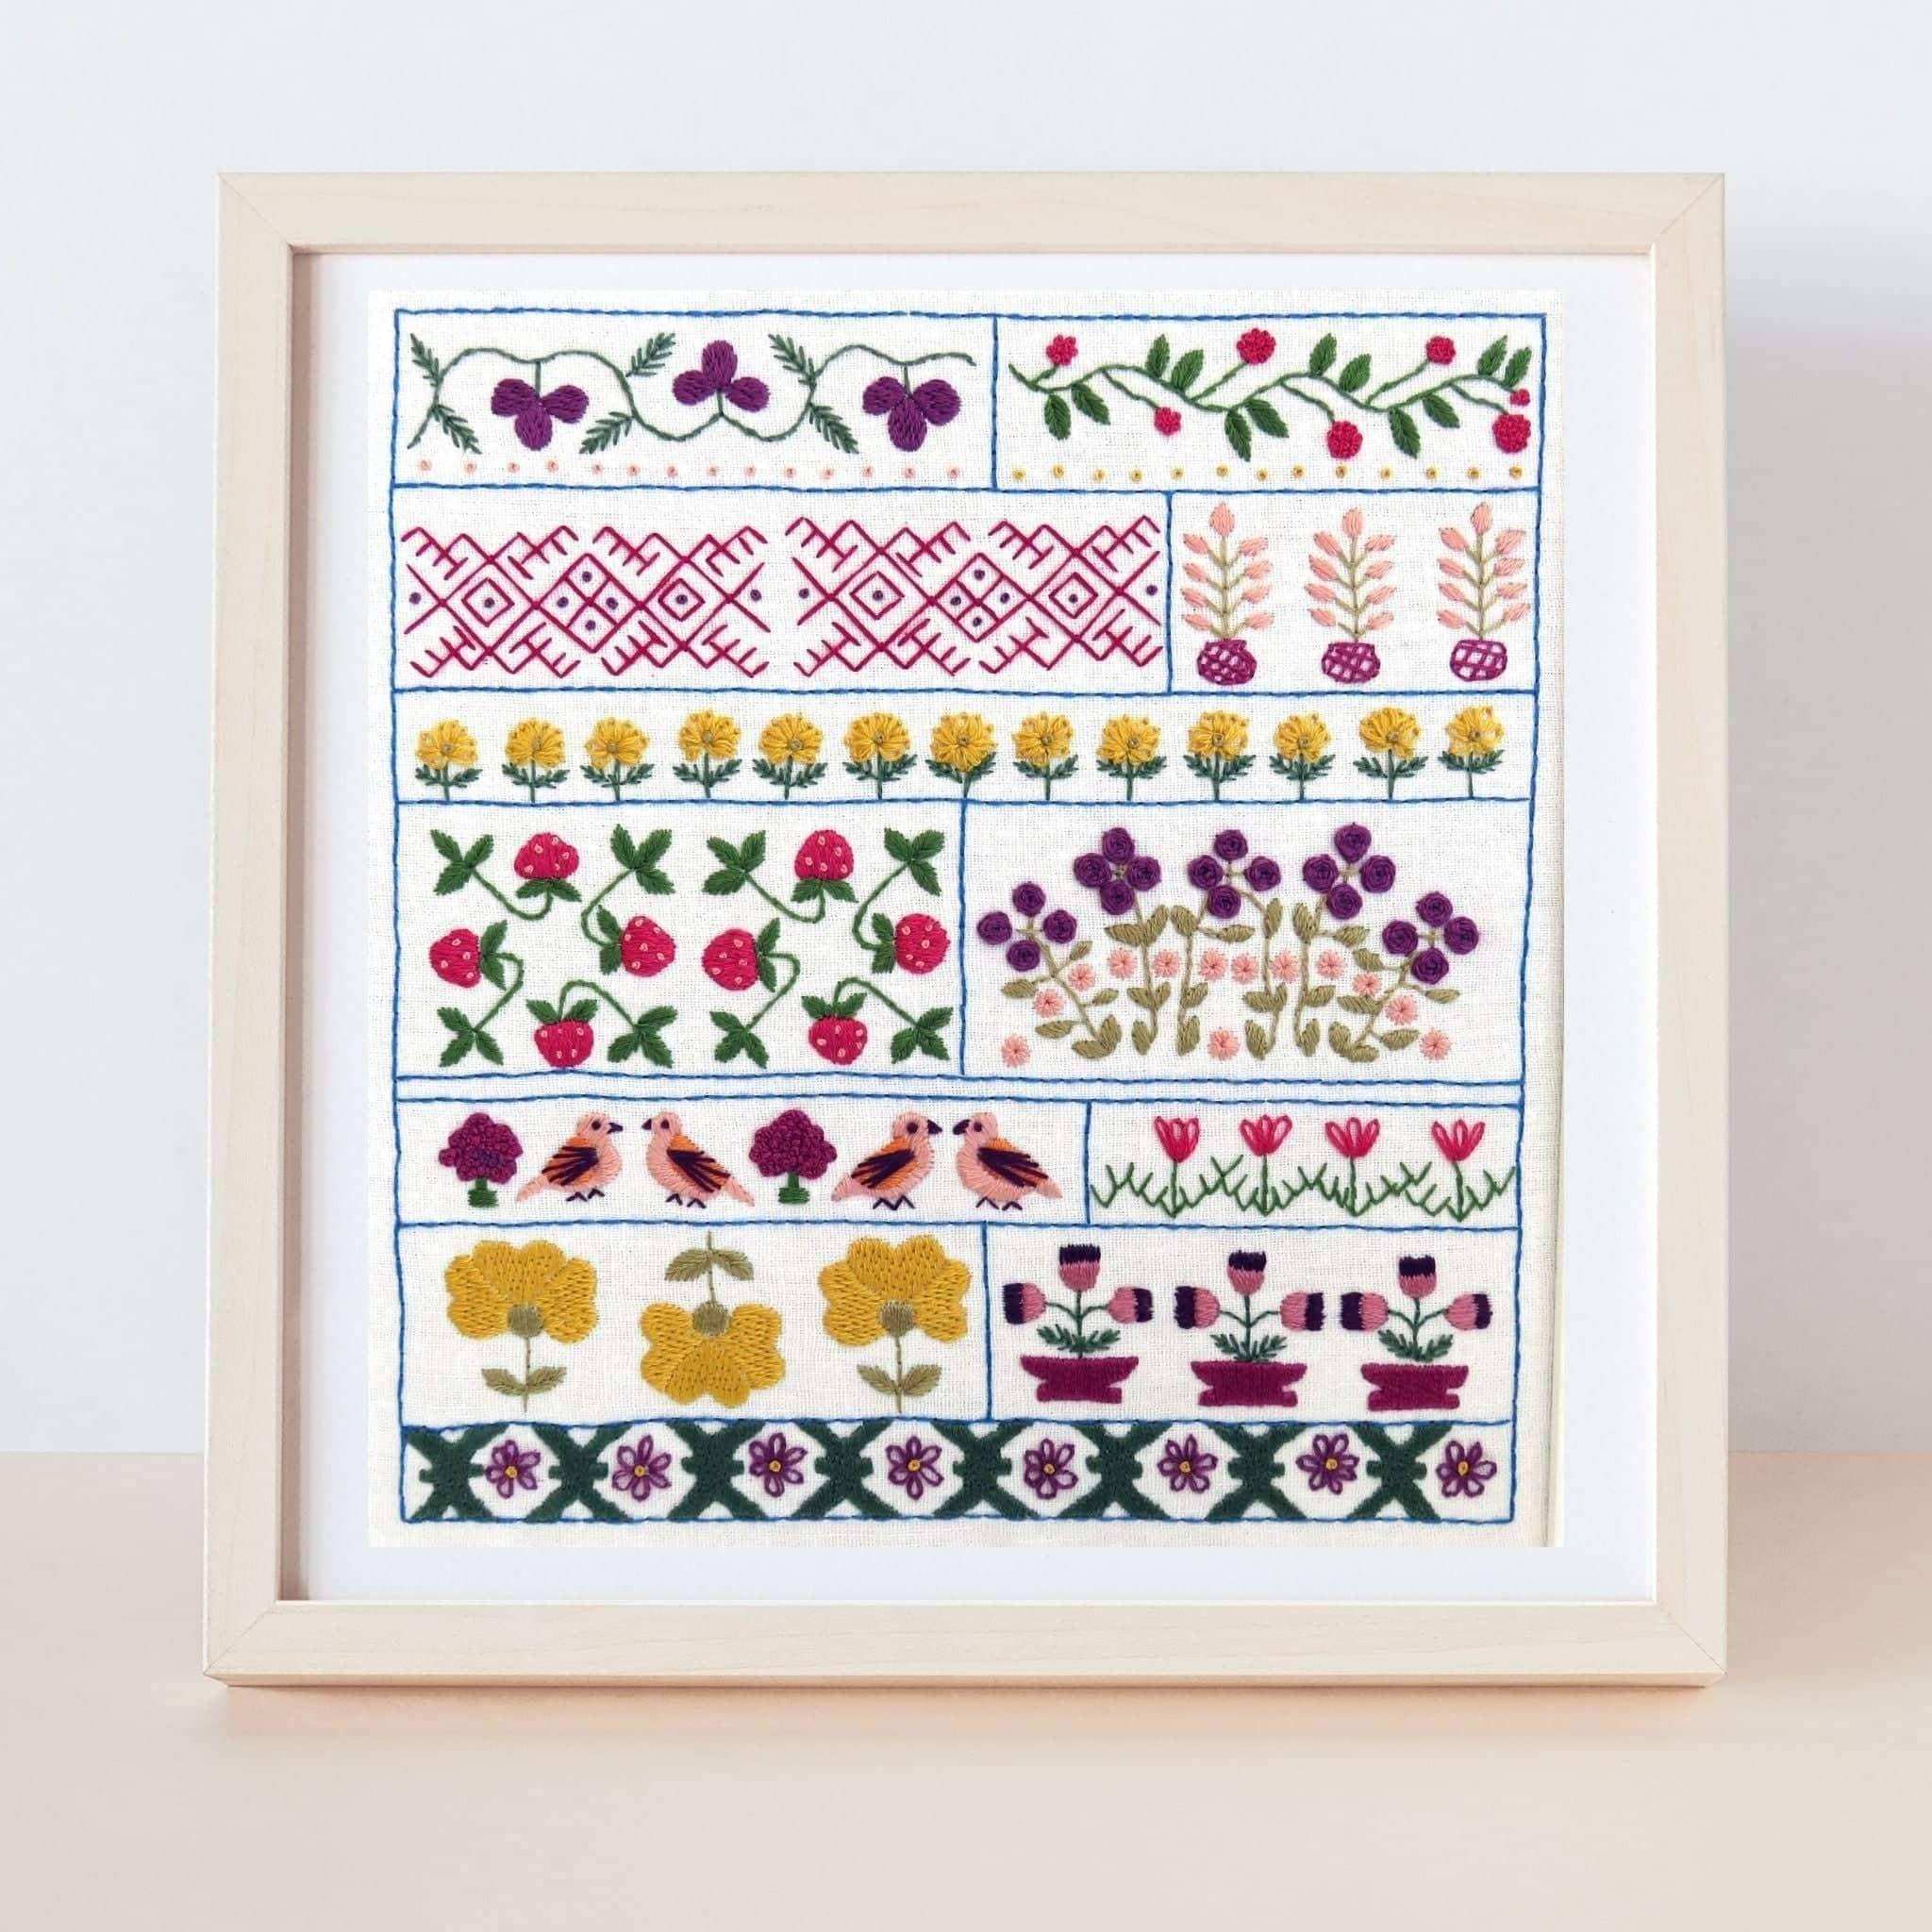 Spring Sampler, Pre Printed Embroidery Fabric Panel Pattern , Pre Printed Fabric Pattern , StitchDoodles , embroidery hoop kit, embroidery kit for adults, embroidery kit for beginers, hand embroidery, hand embroidery fabric, hand embroidery kit, PDF pattern , StitchDoodles , shop.stitchdoodles.com